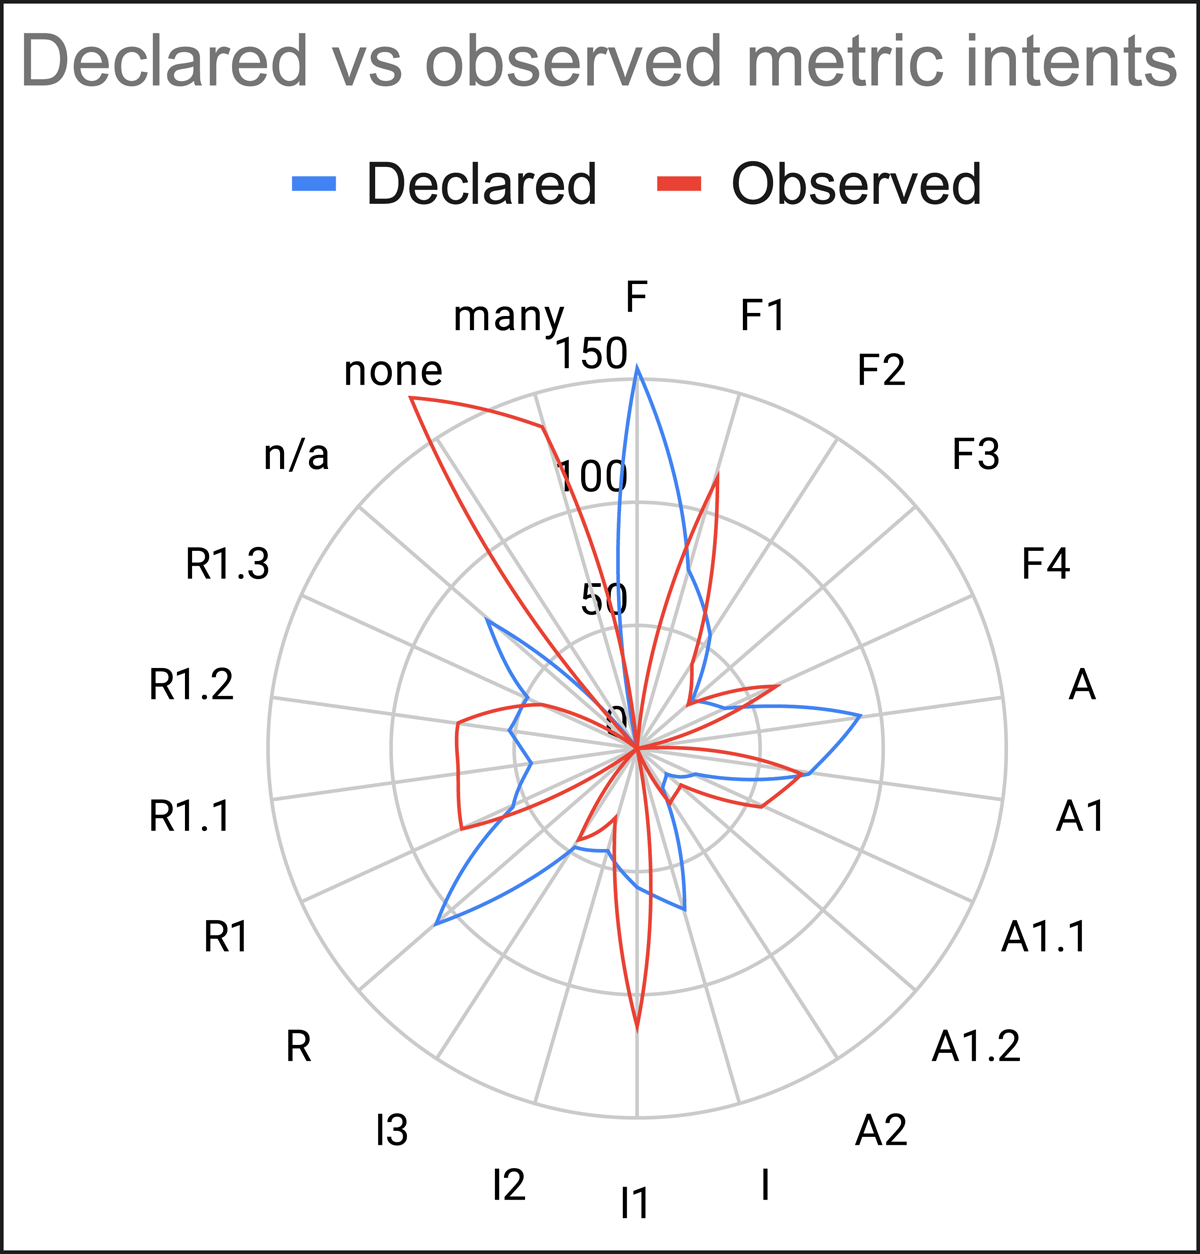 Declared vs observed metric intents